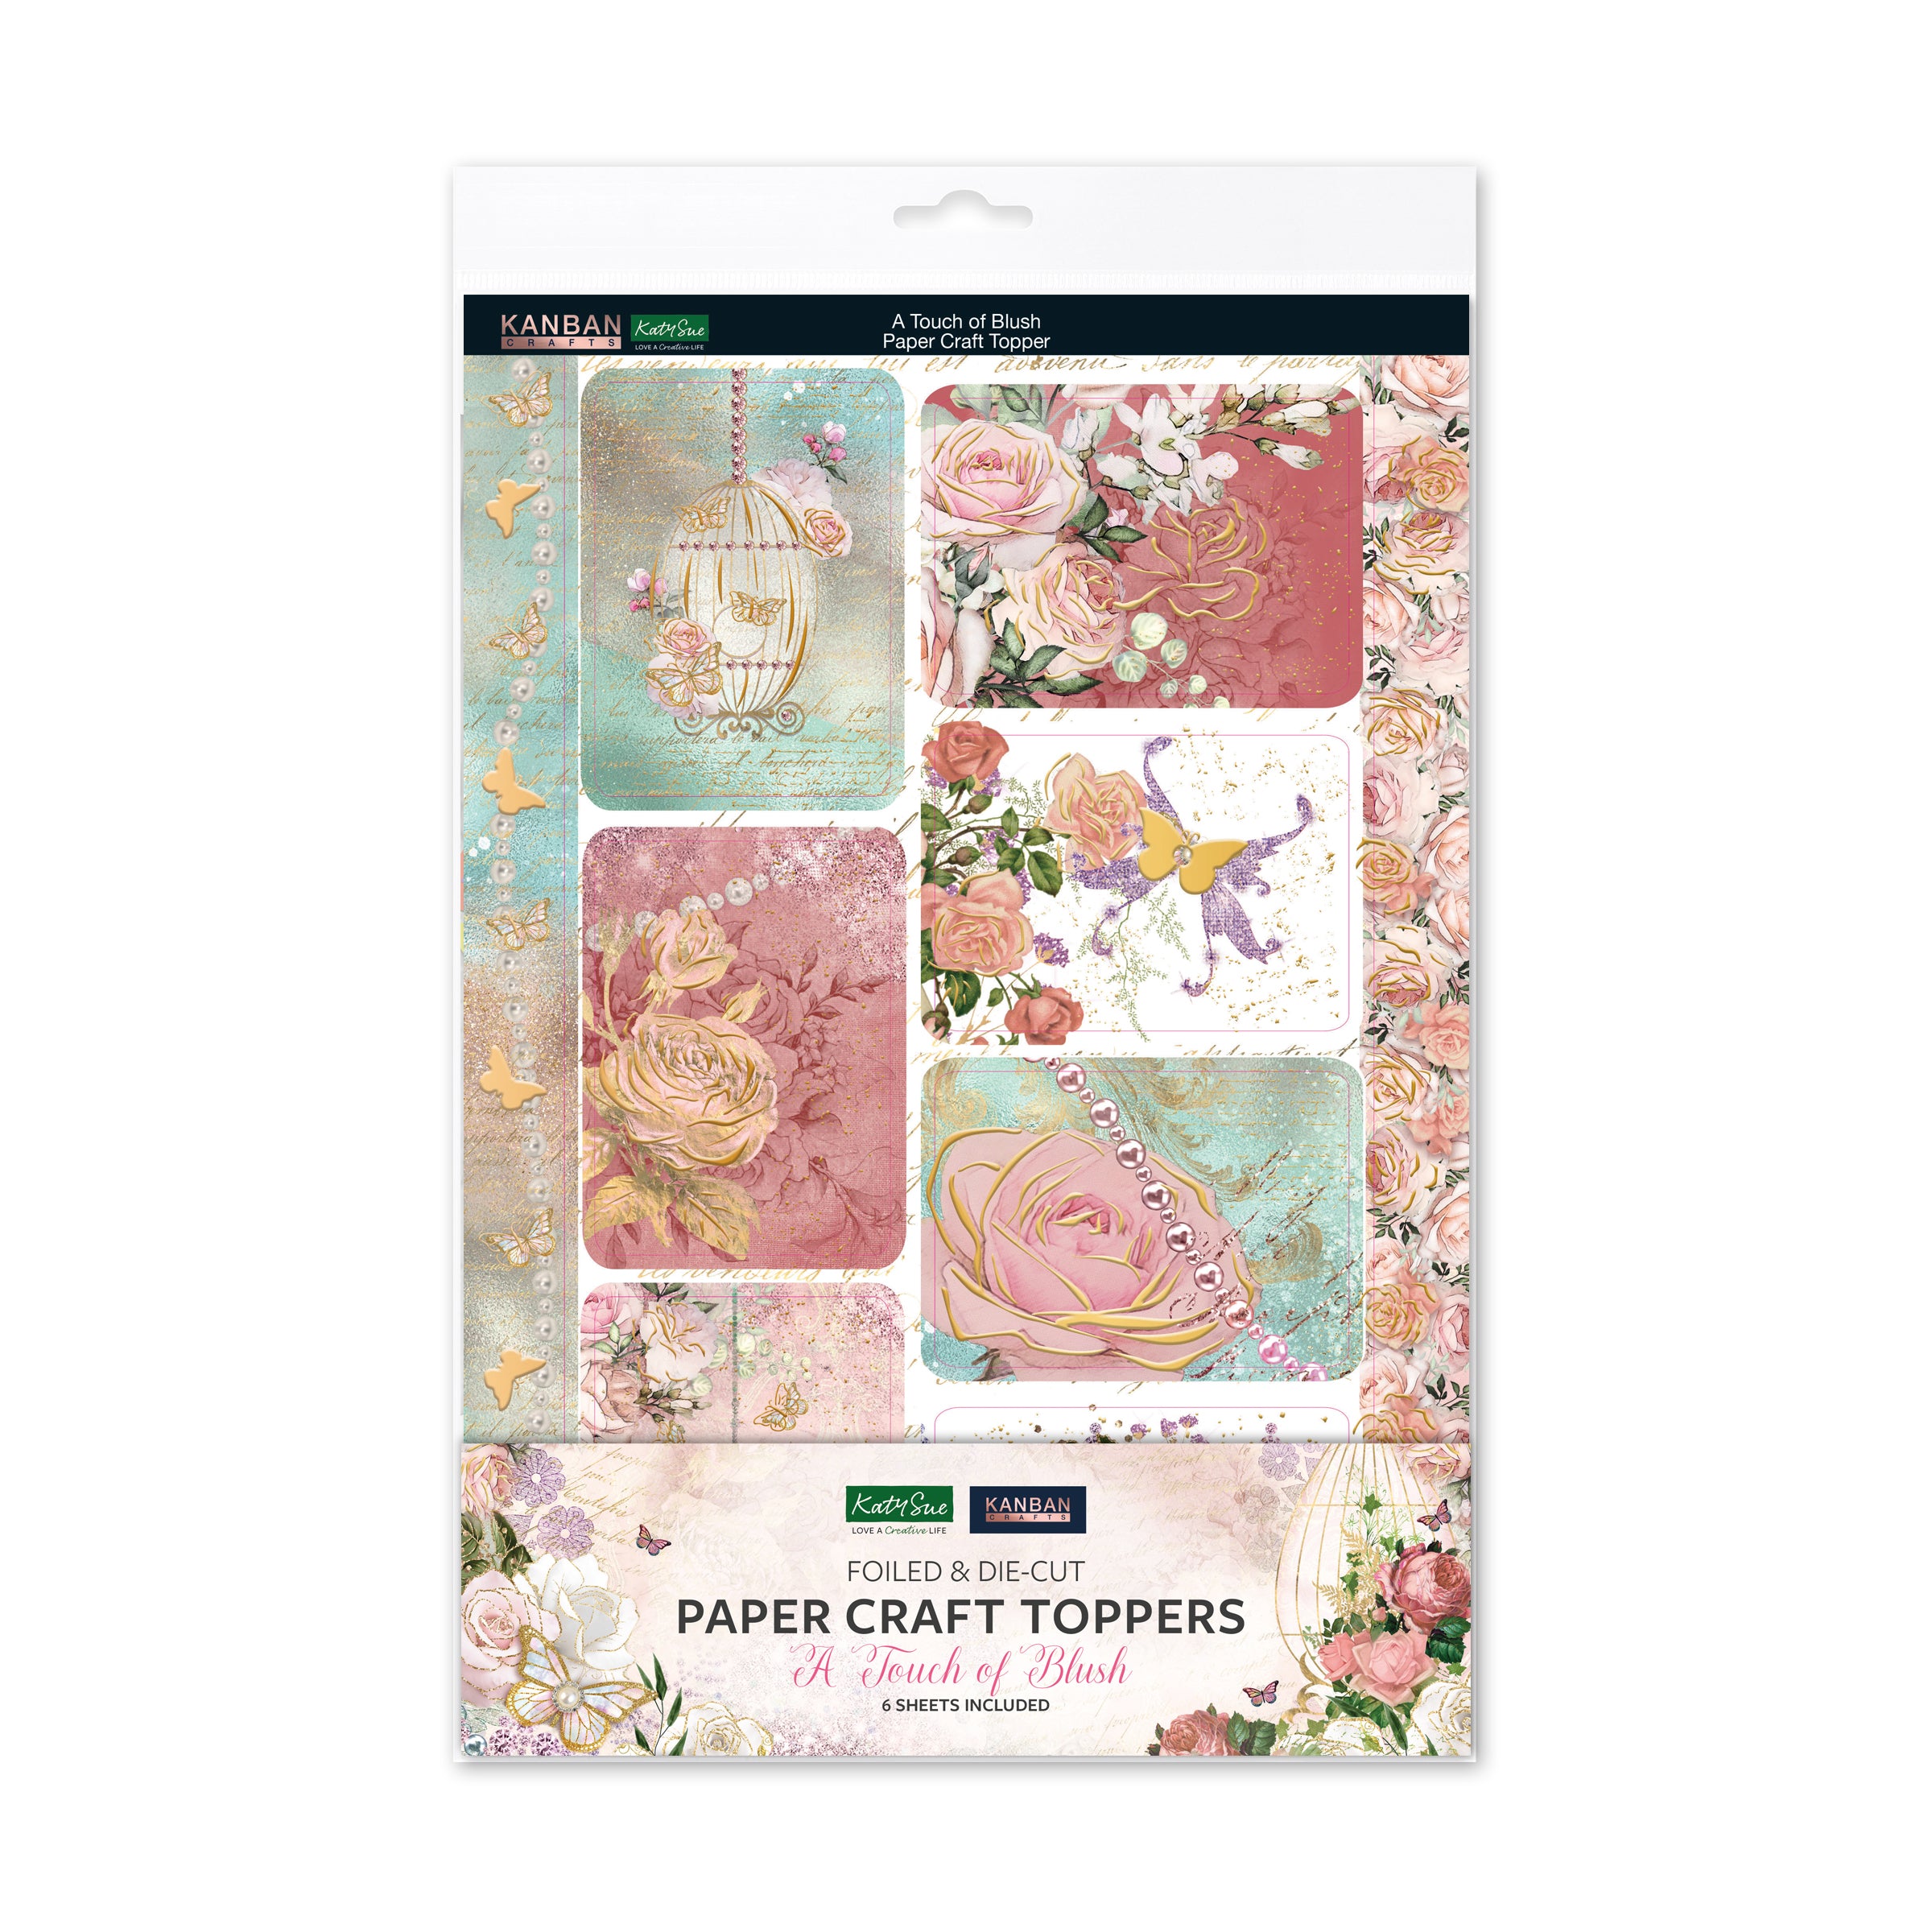 Kanban Crafts A Touch of Blush Foiled Paper Craft Toppers, 6 sheets